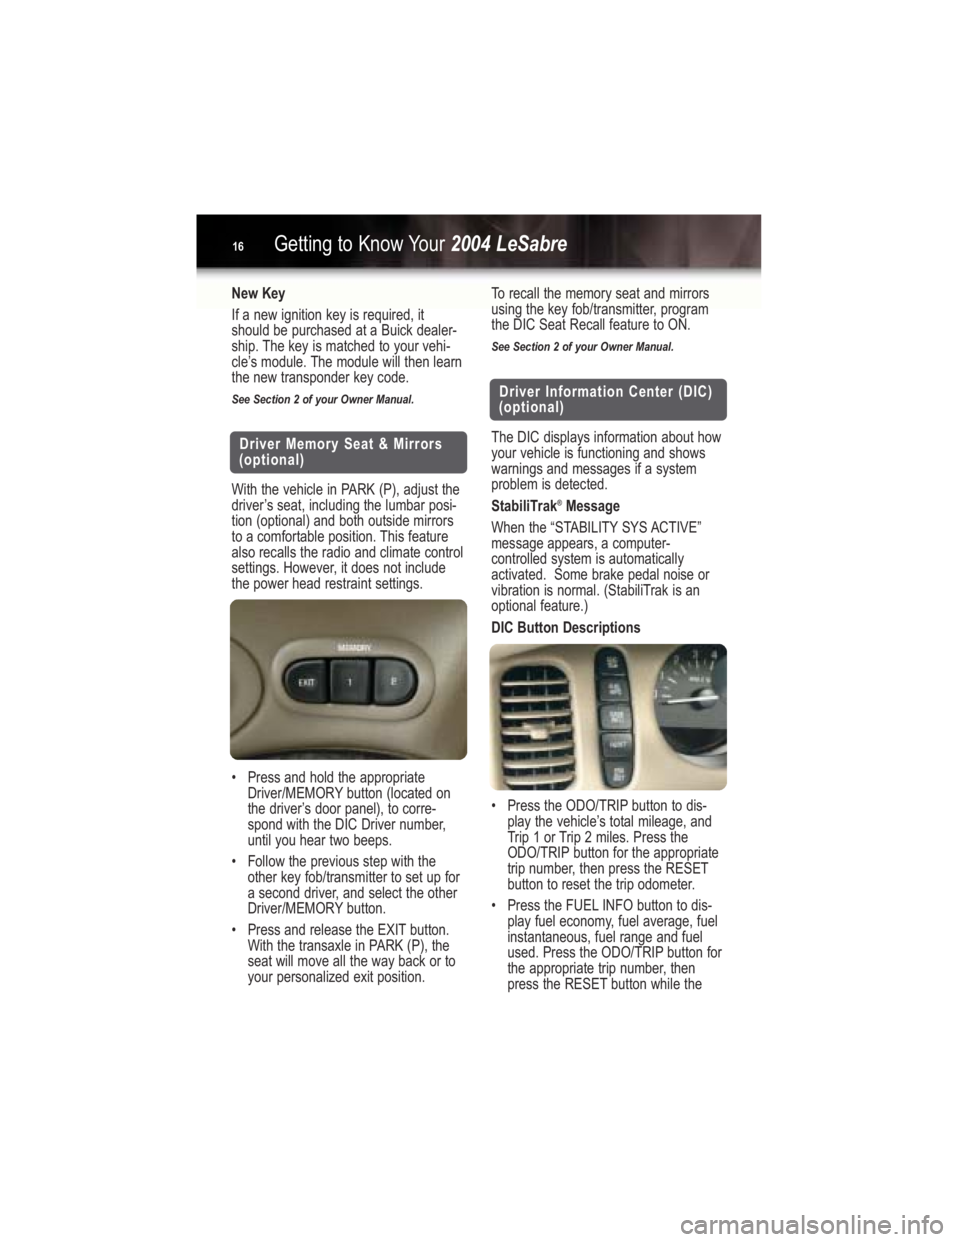 BUICK LESABRE 2004  Get To Know Guide Getting to Know Your2004 LeSabre16
New Key
If a new ignition key is required, it
should be purchased at a Buick dealer-
ship. The key is matched to your vehi-
cle’s module. The module will then lear